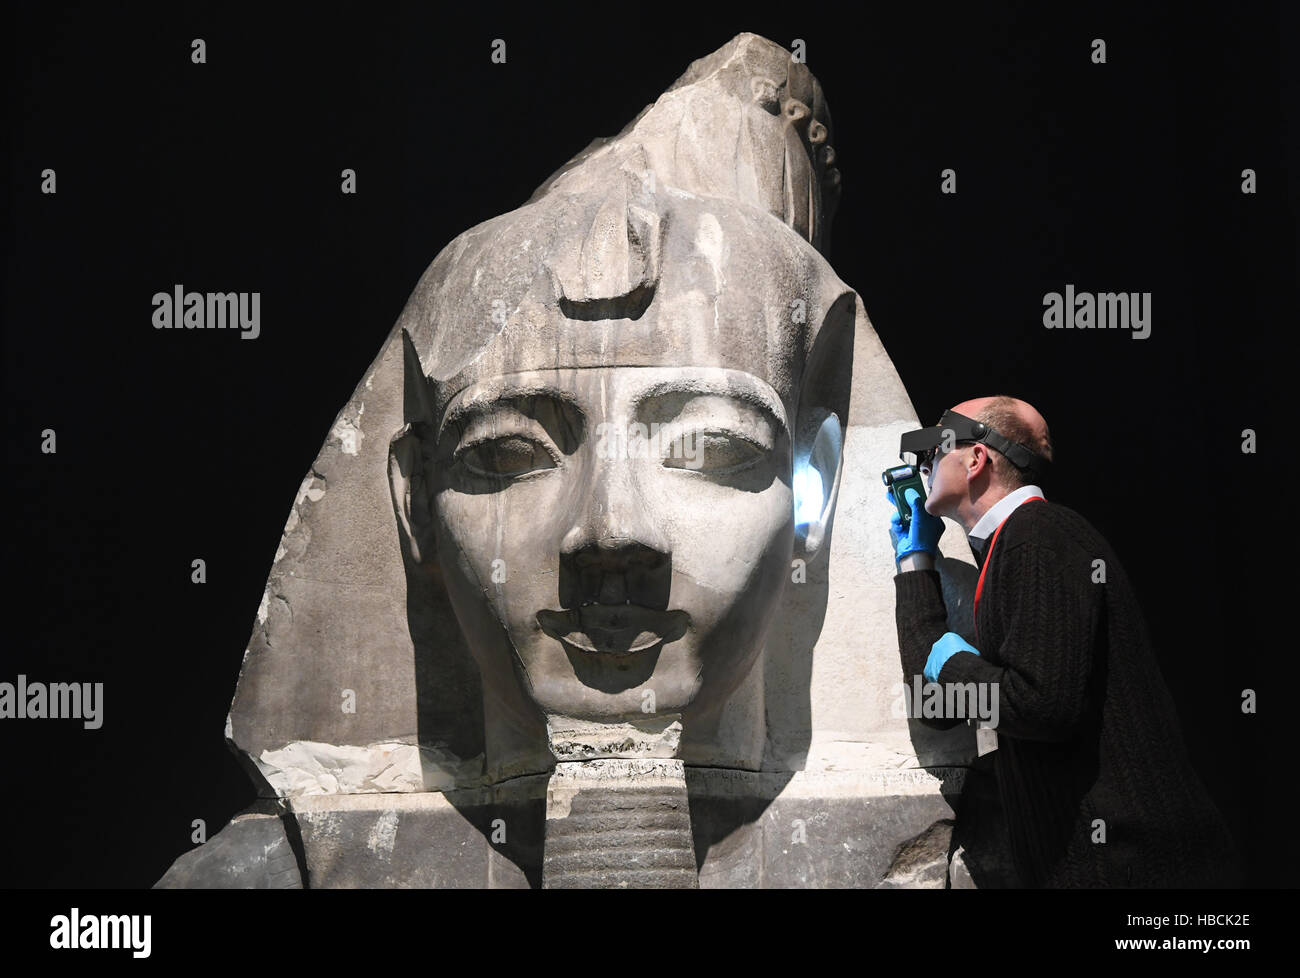 Oliver Morr, head of restorations at the Badischen Landesmuseum, works on a 3.metre-high bust of Ramses II made out of plaster in the Karlsruhe Castle in Germany, 06 December 2016. The bust, made in London in 1873, will be displayed as part of the museum's 'Ramses: Divine Ruler on the Nile' exhibition that opens on the 17.12.2016 and runs through to the 18.06.2017. Photo: Uli Deck/dpa Stock Photo